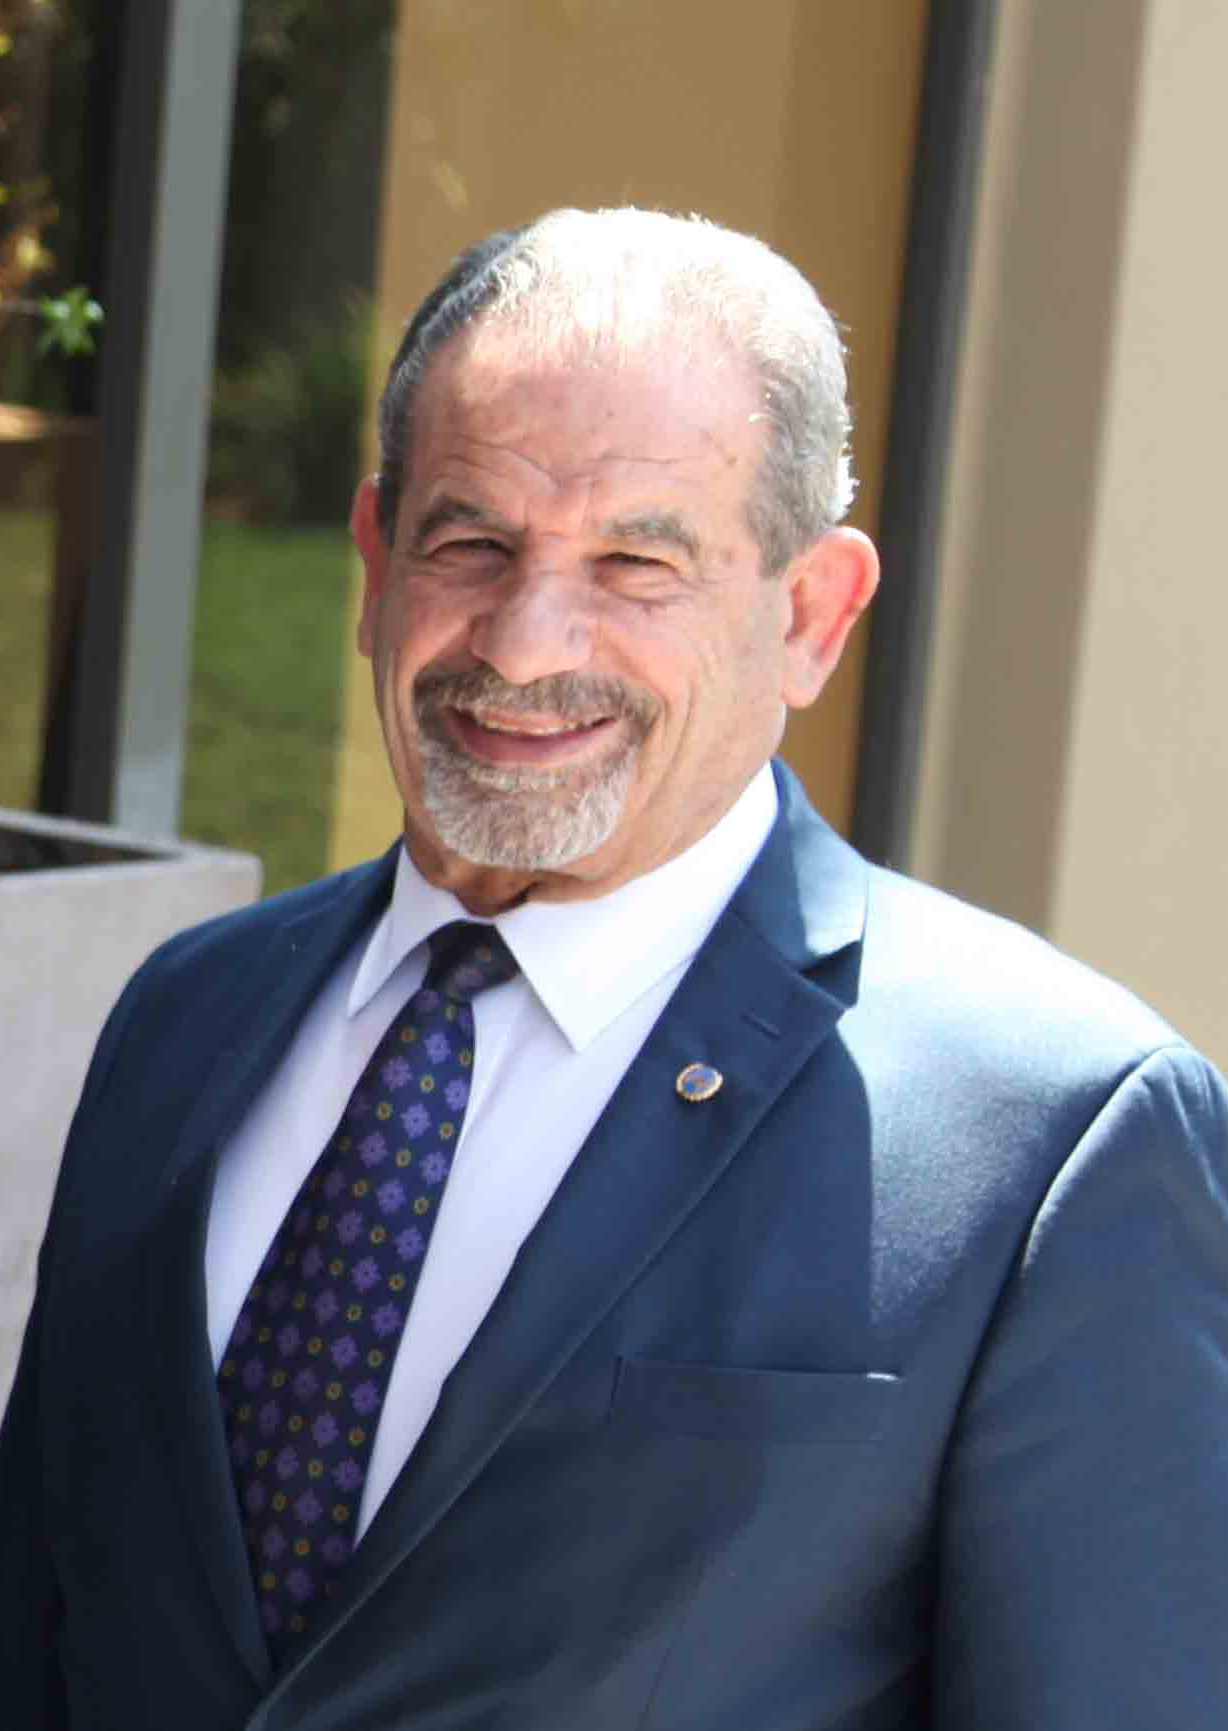 Minister of Foreign Affairs and International Relations, The Hon. Ralph Abdel Kader